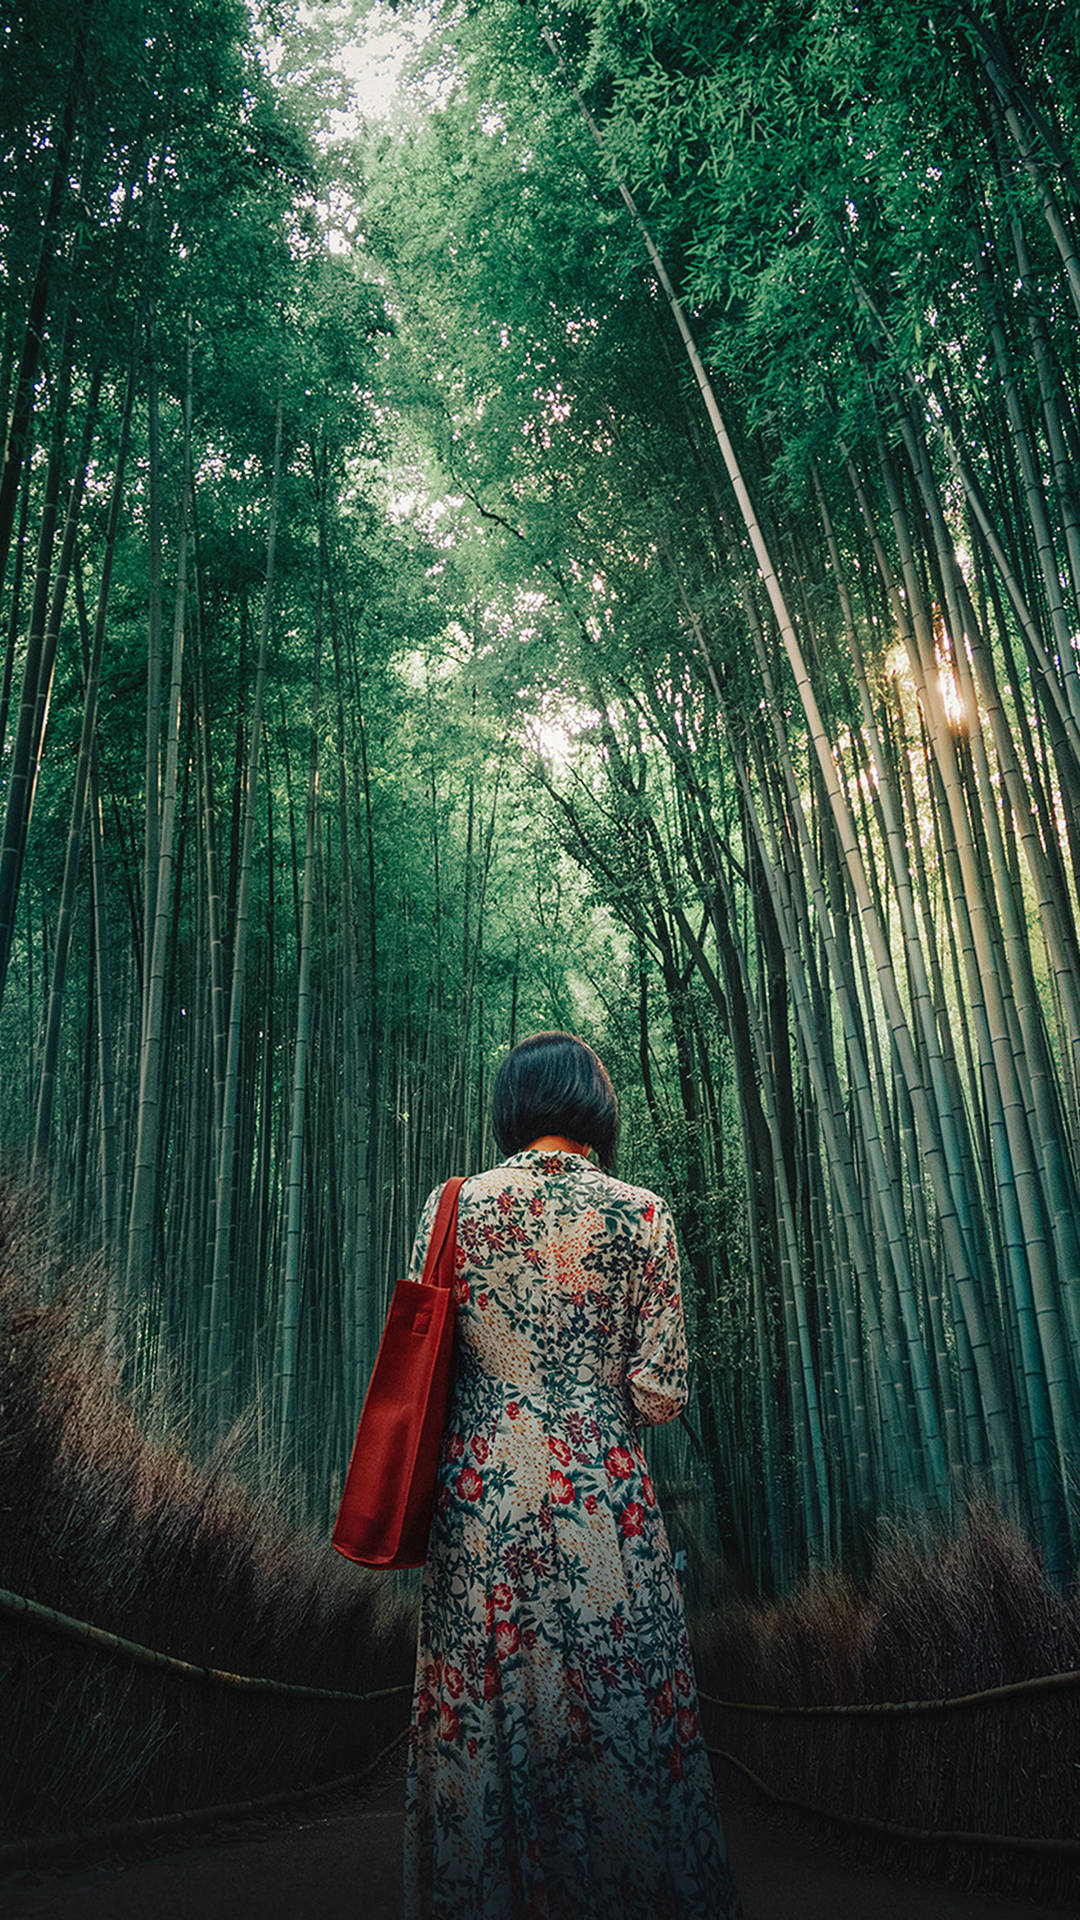 Girl In A Bamboo Forest Iphone